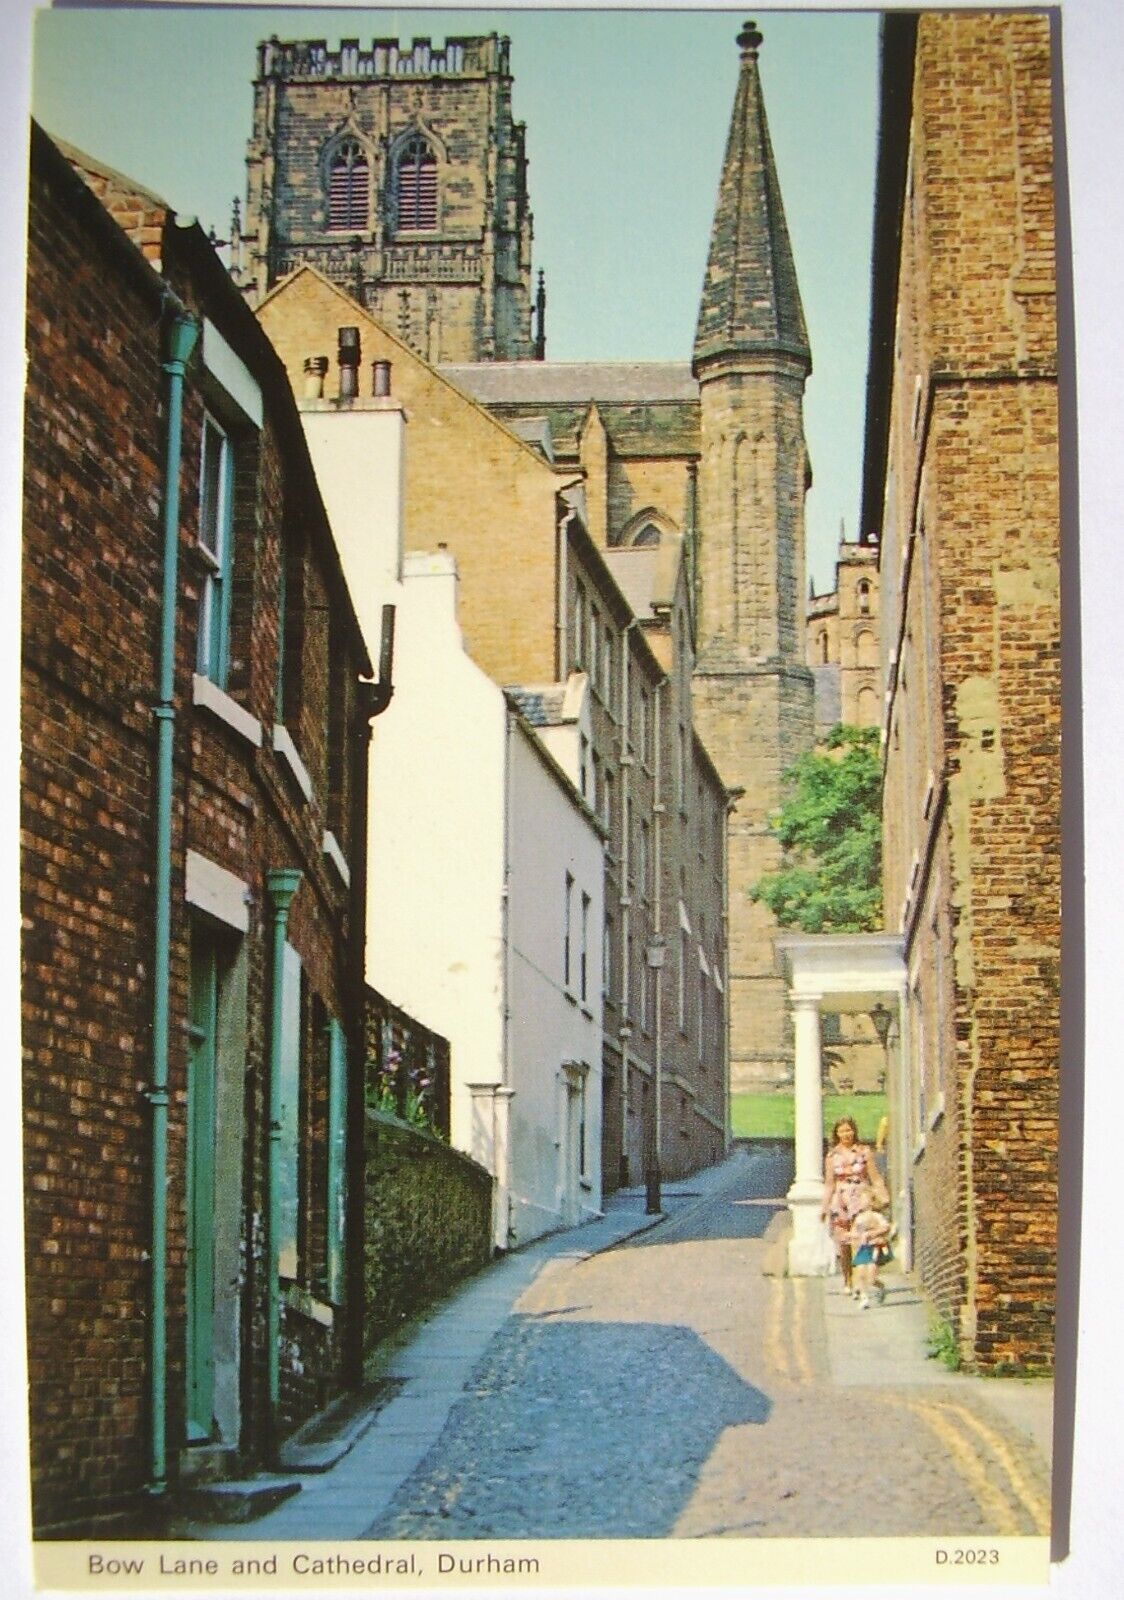 House Clearance - Dennis colour service of Bow Lane and Durham Cathedral 1960s